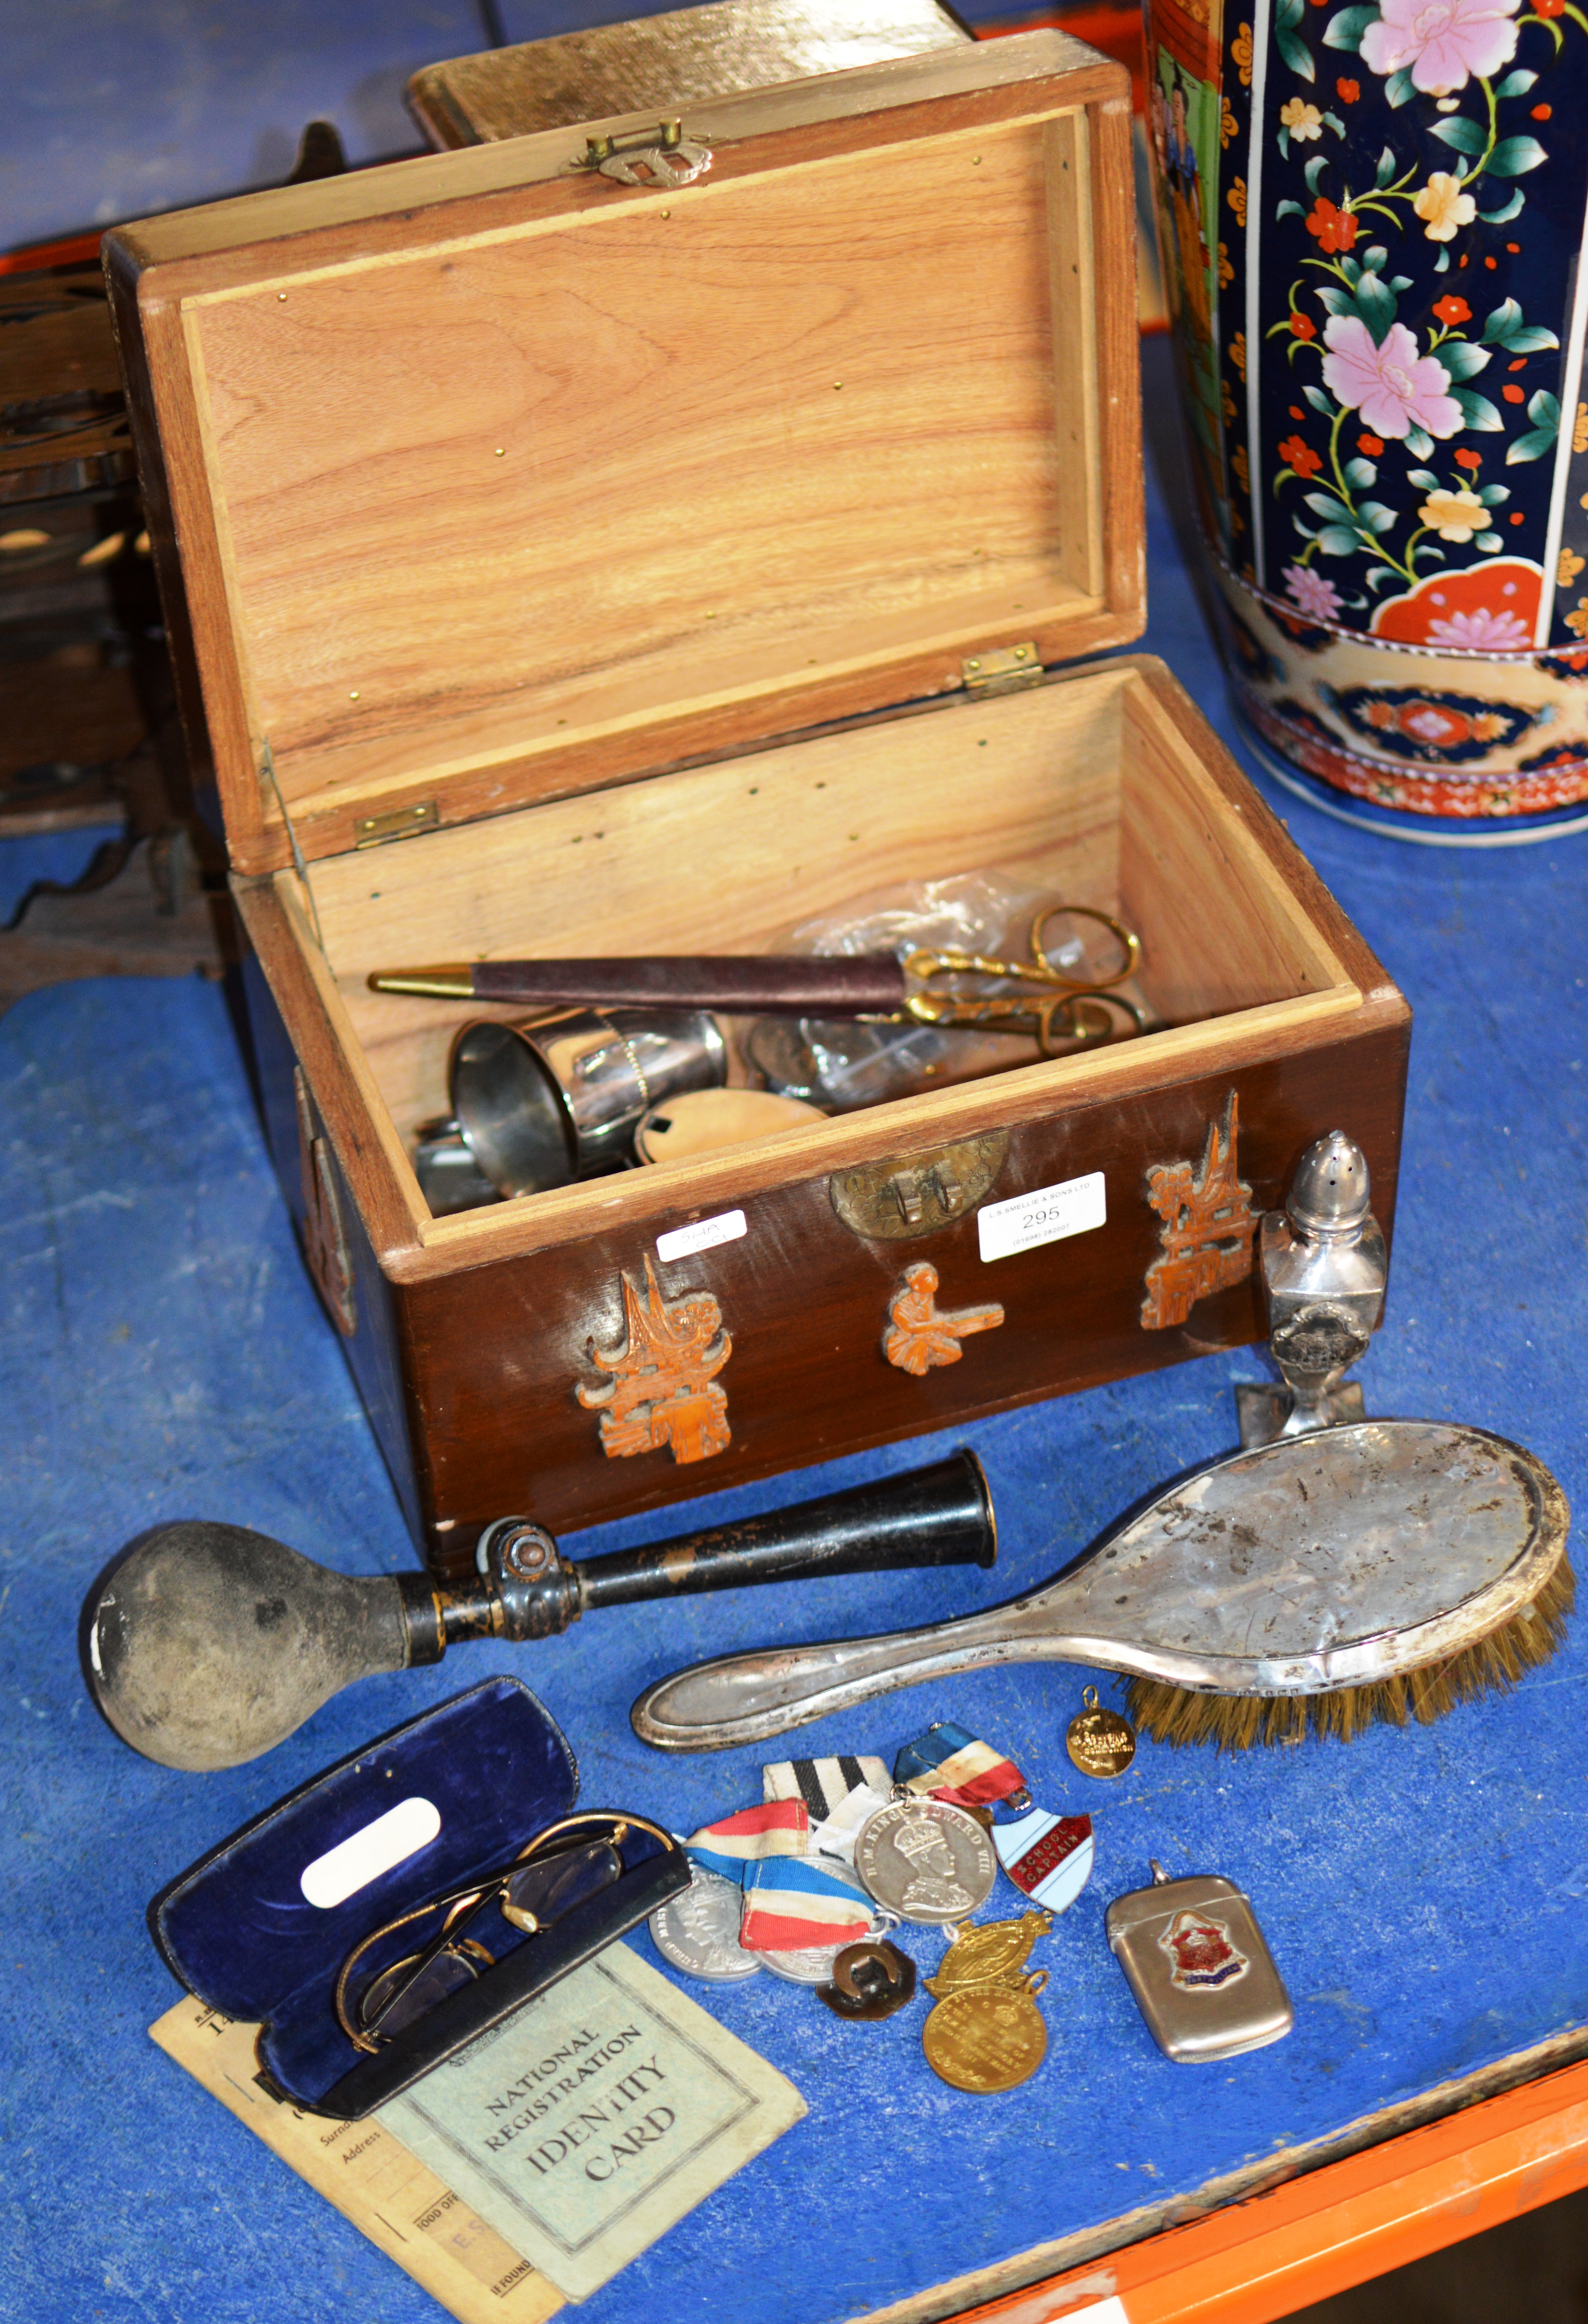 CHINESE WOODEN BOX WITH SILVER BRUSH, ORNATE SCISSORS, VARIOUS BADGES, NOVELTY CAR HORN, OLD